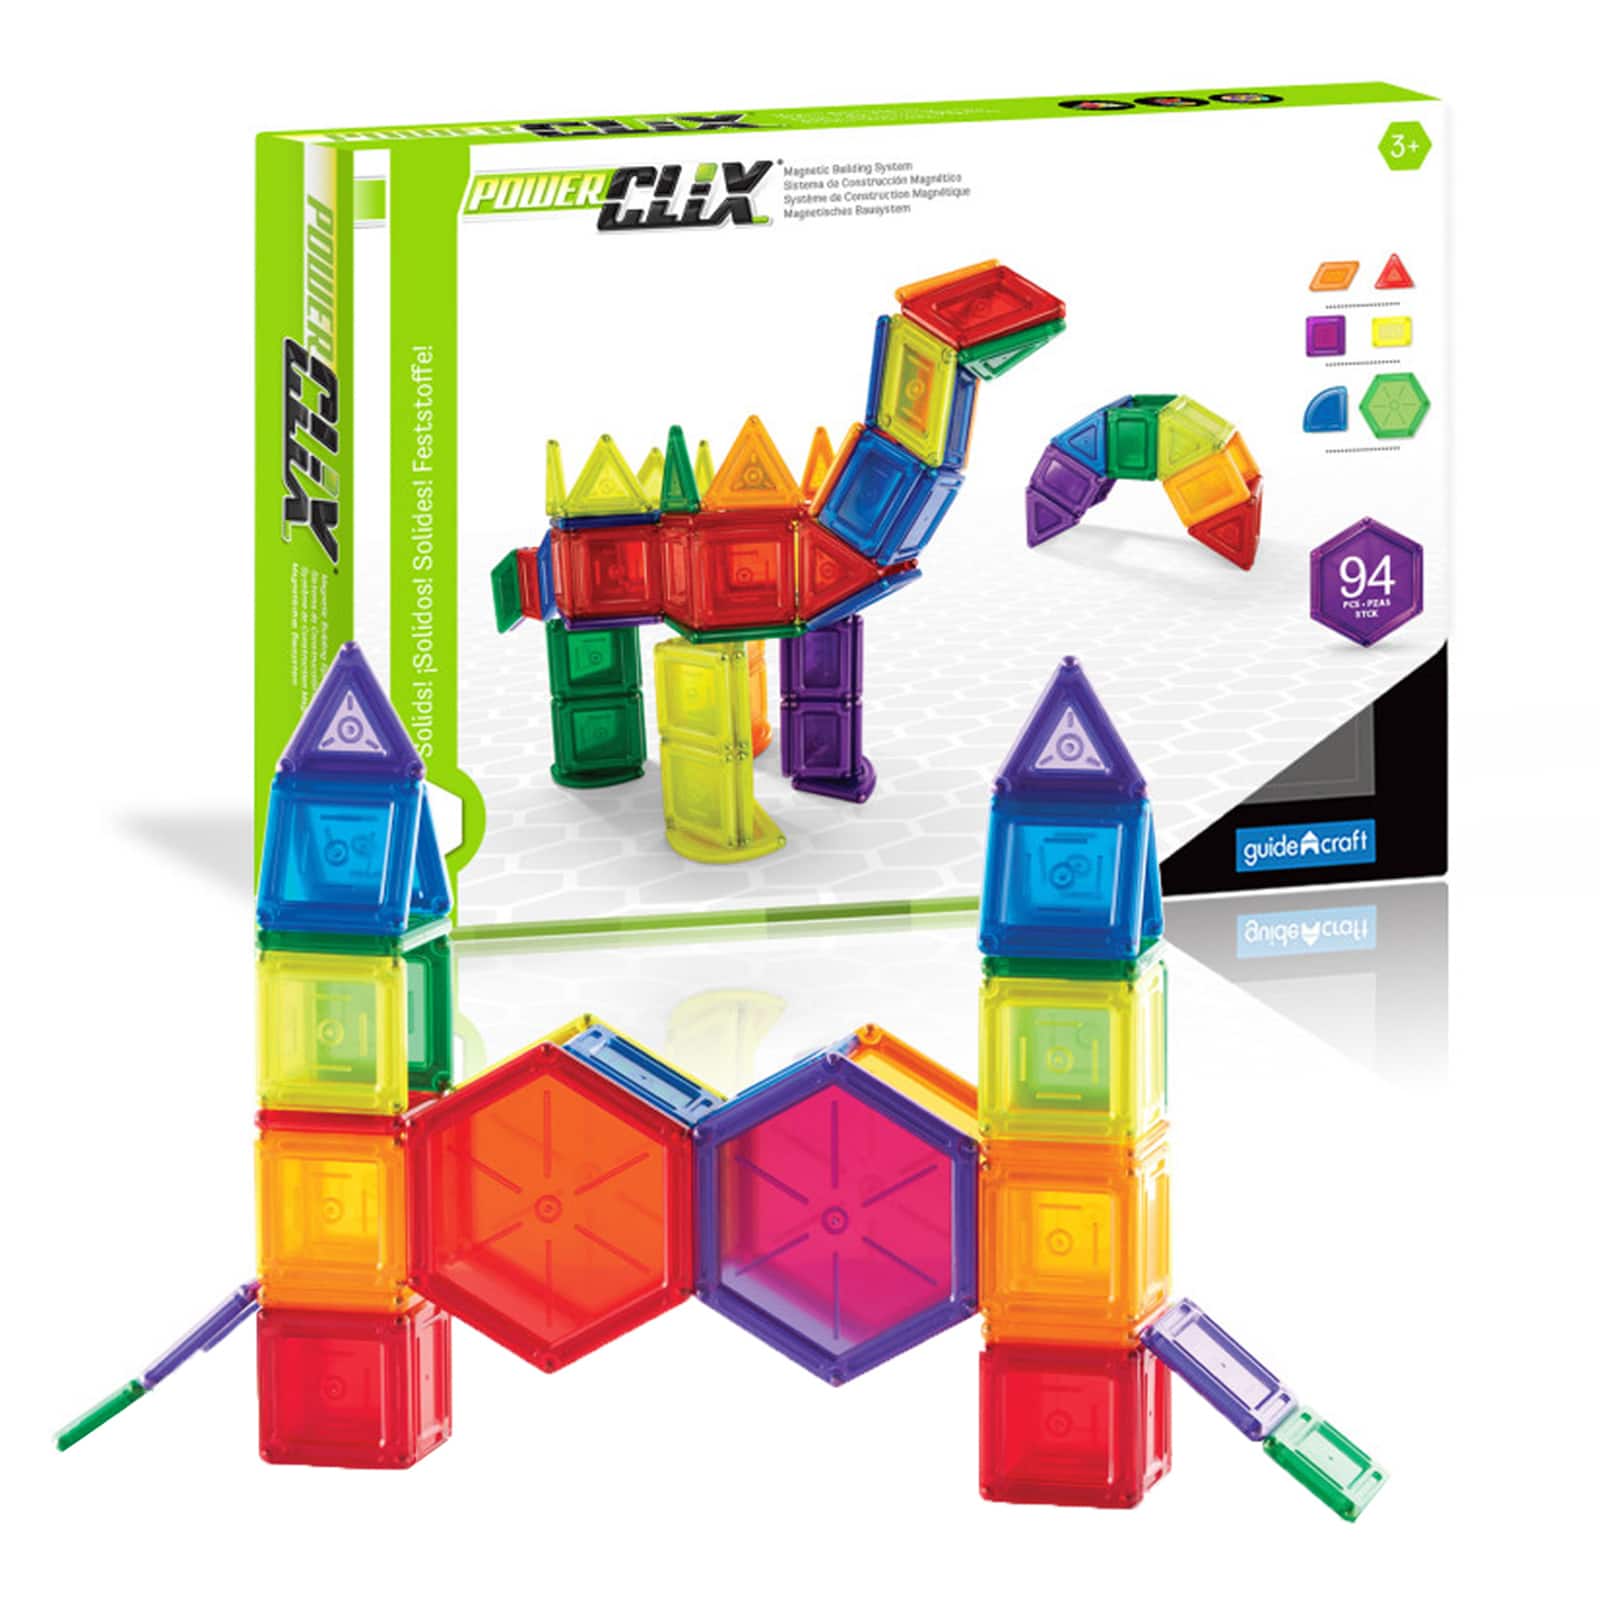 Guidecraft PowerClix&#xAE; Solids Magnetic Building Set